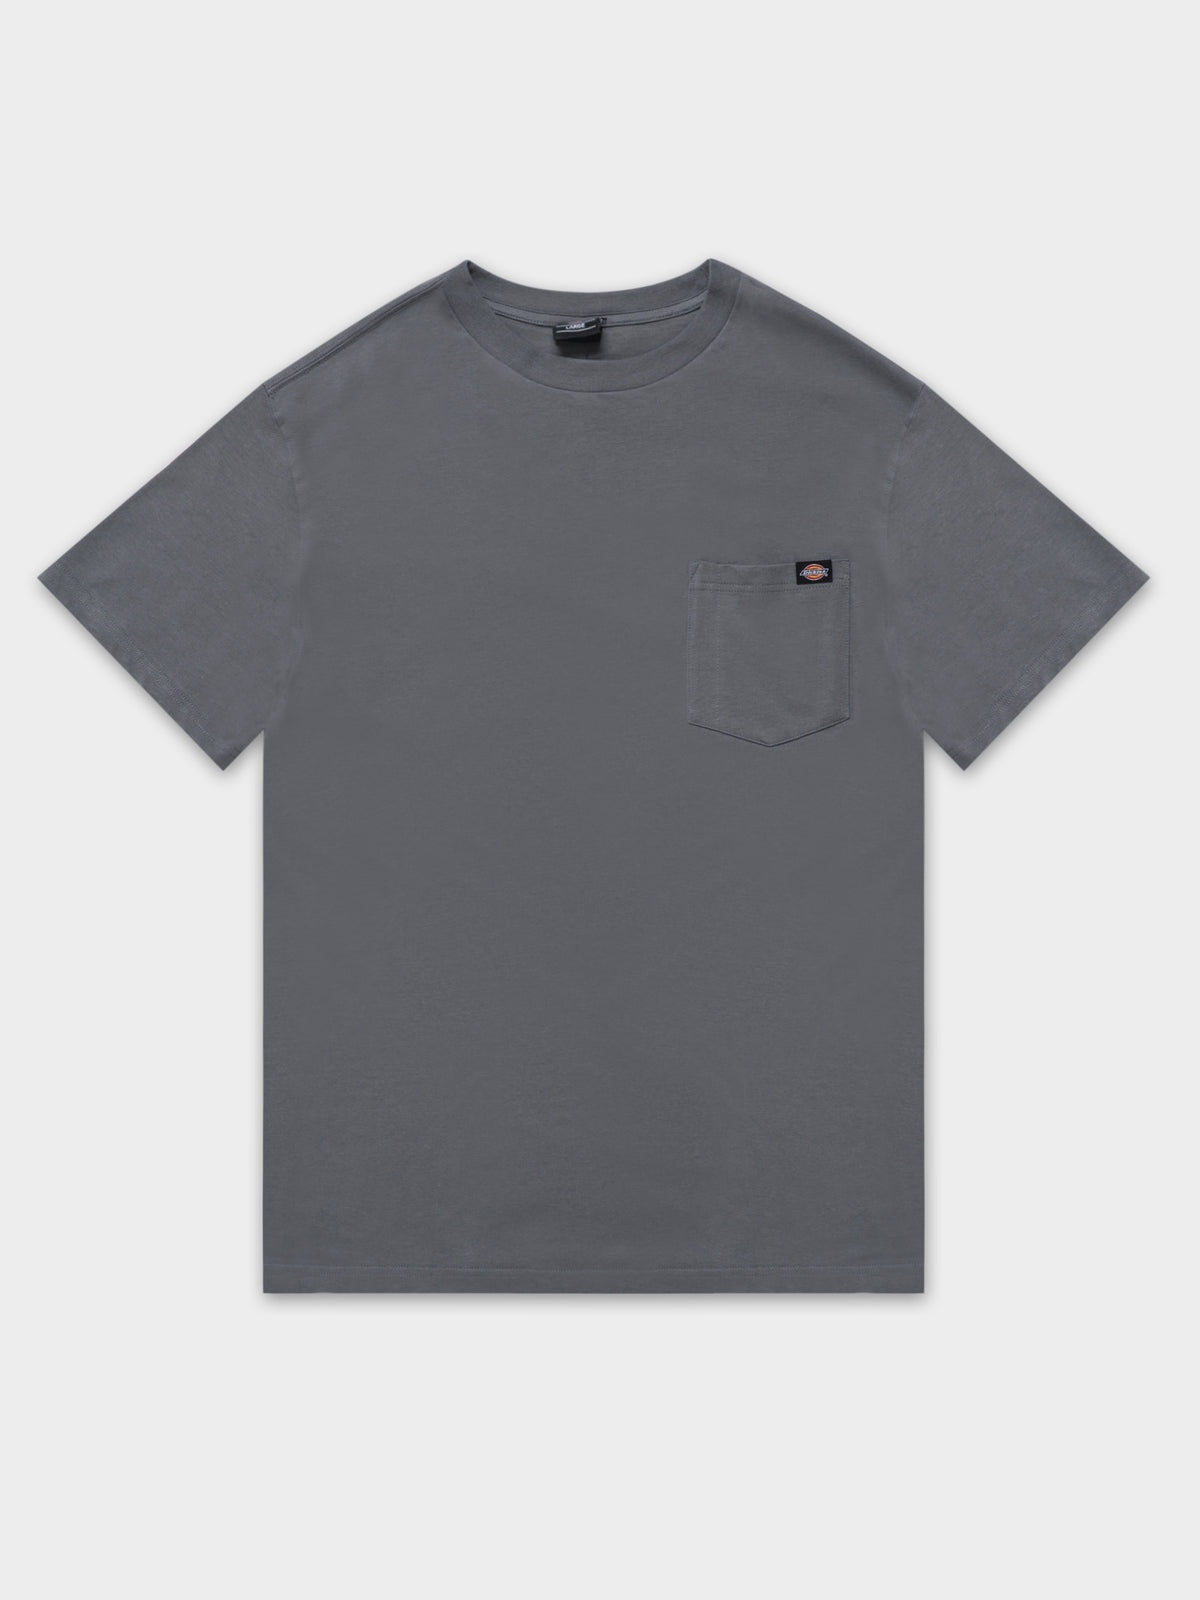 Ws450 Heavyweight T-Shirt in Charcoal